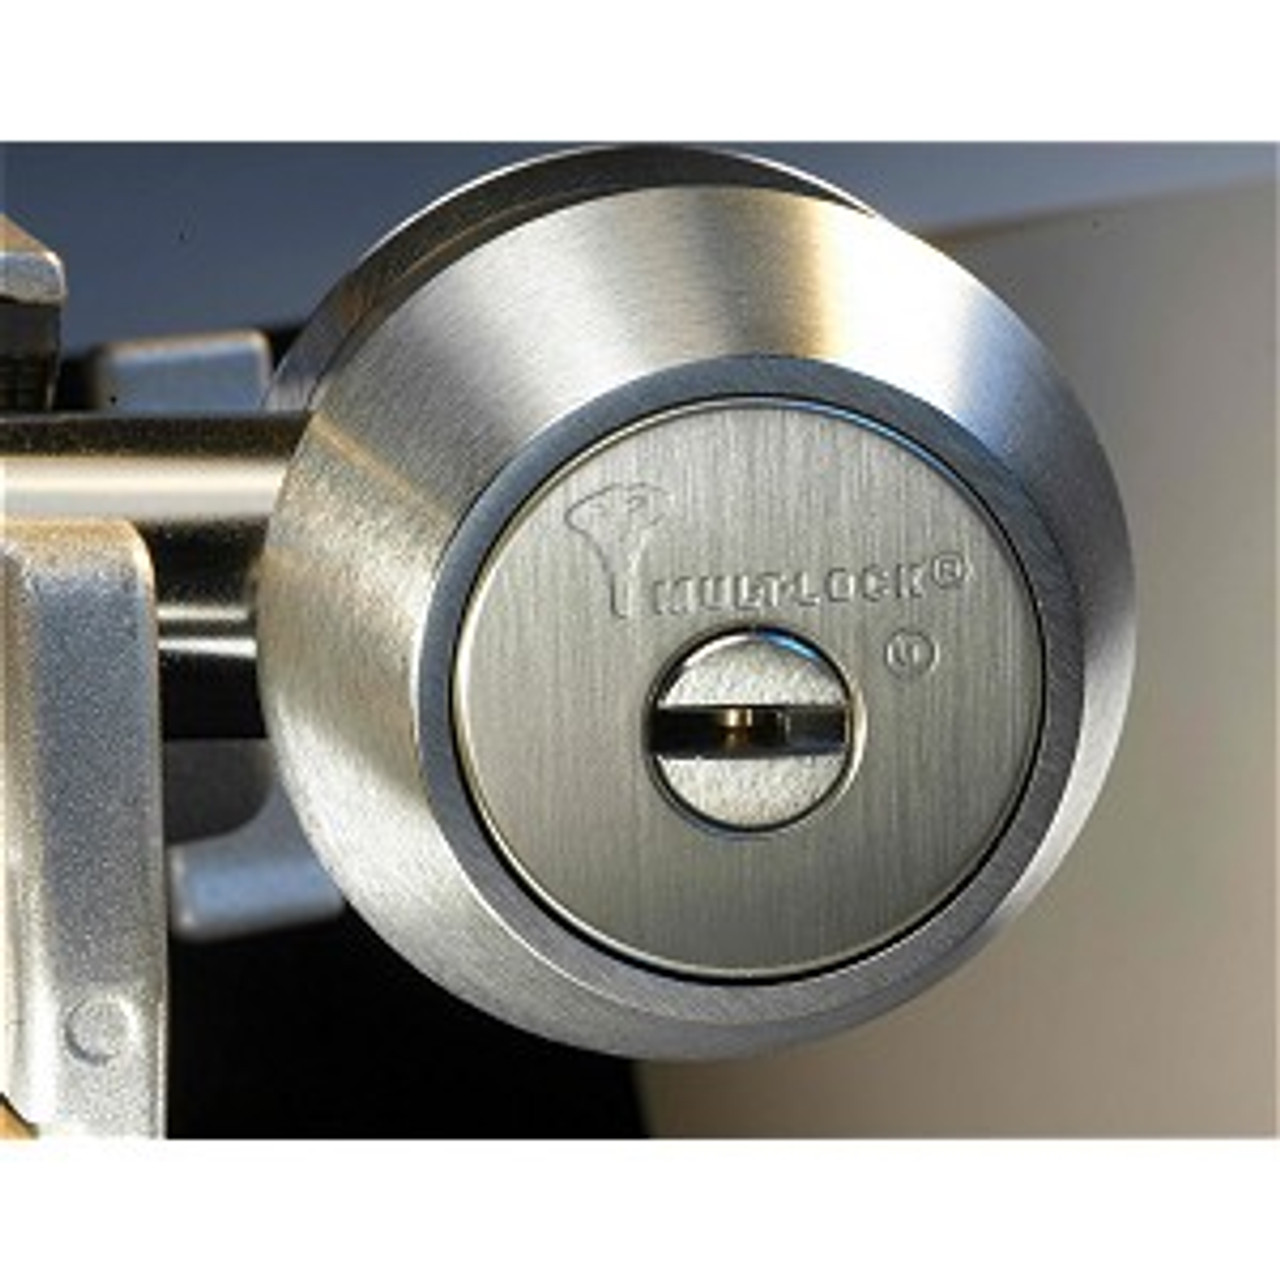 MUL-T-LOCK Cylinders for SCHLAGE Double Cylinder Deadbolt